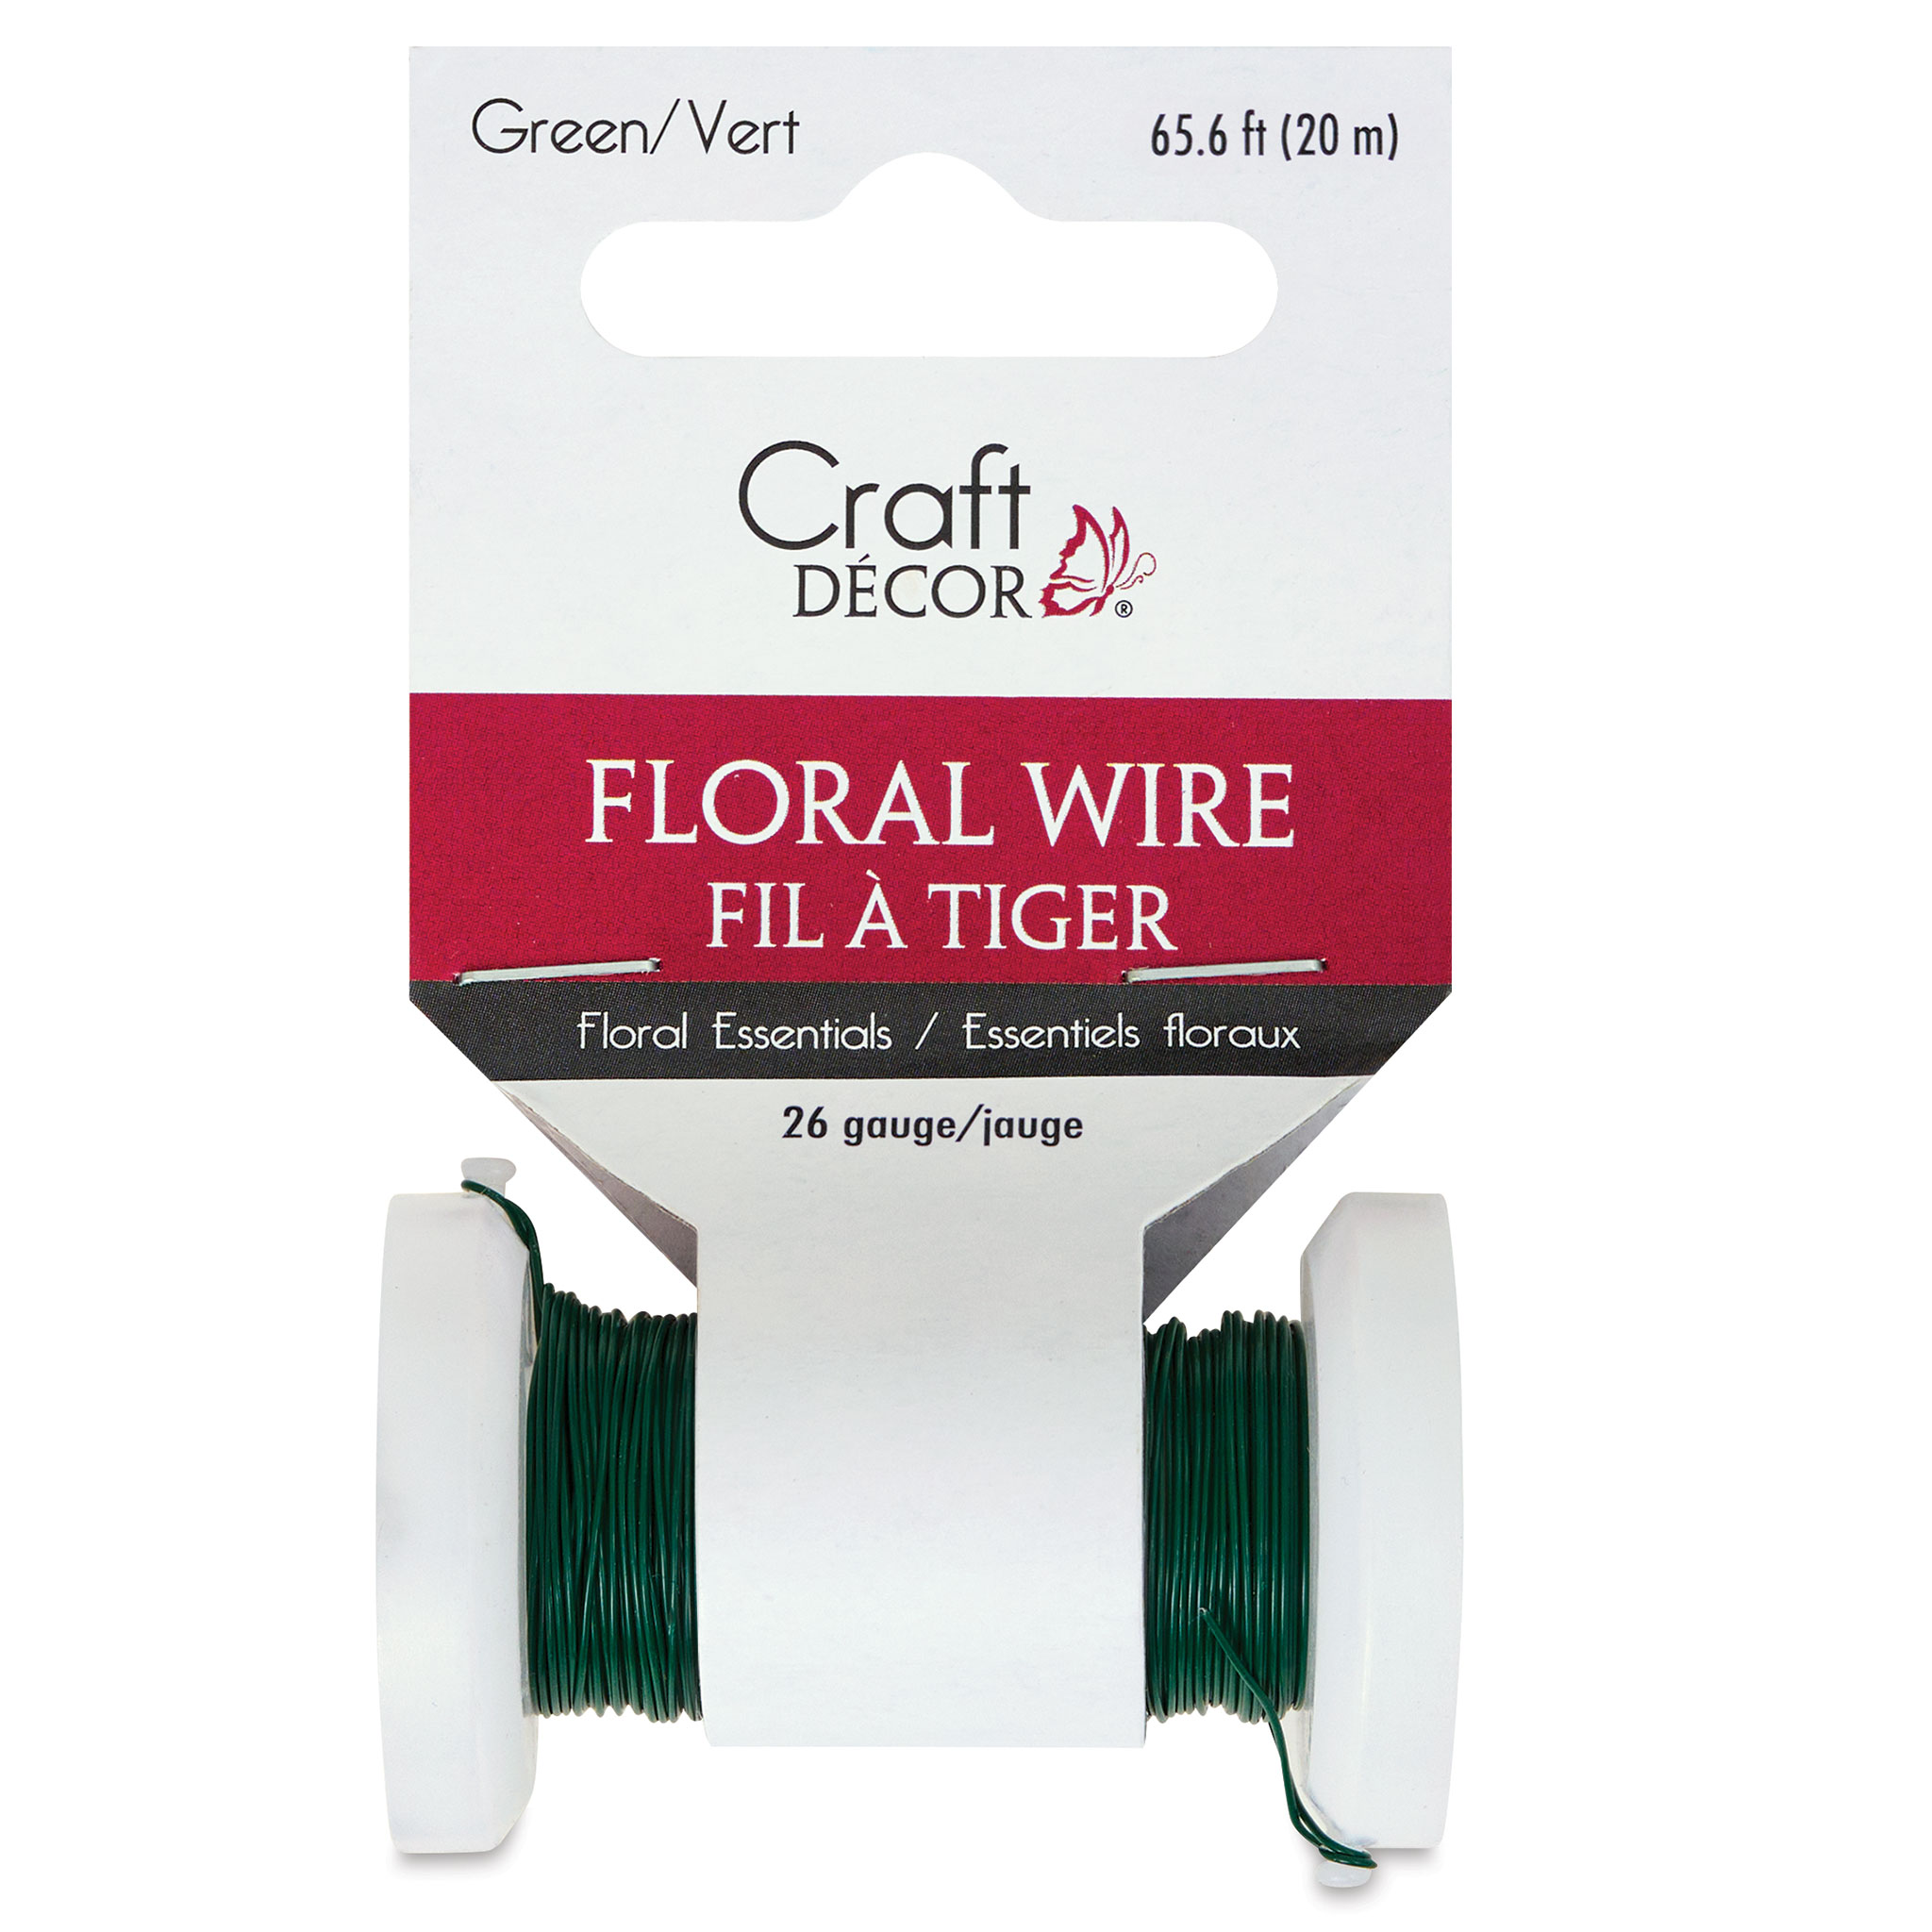 Craft Decor Floral Wire - Green, 26 Gauge, 65.5 ft, Spool